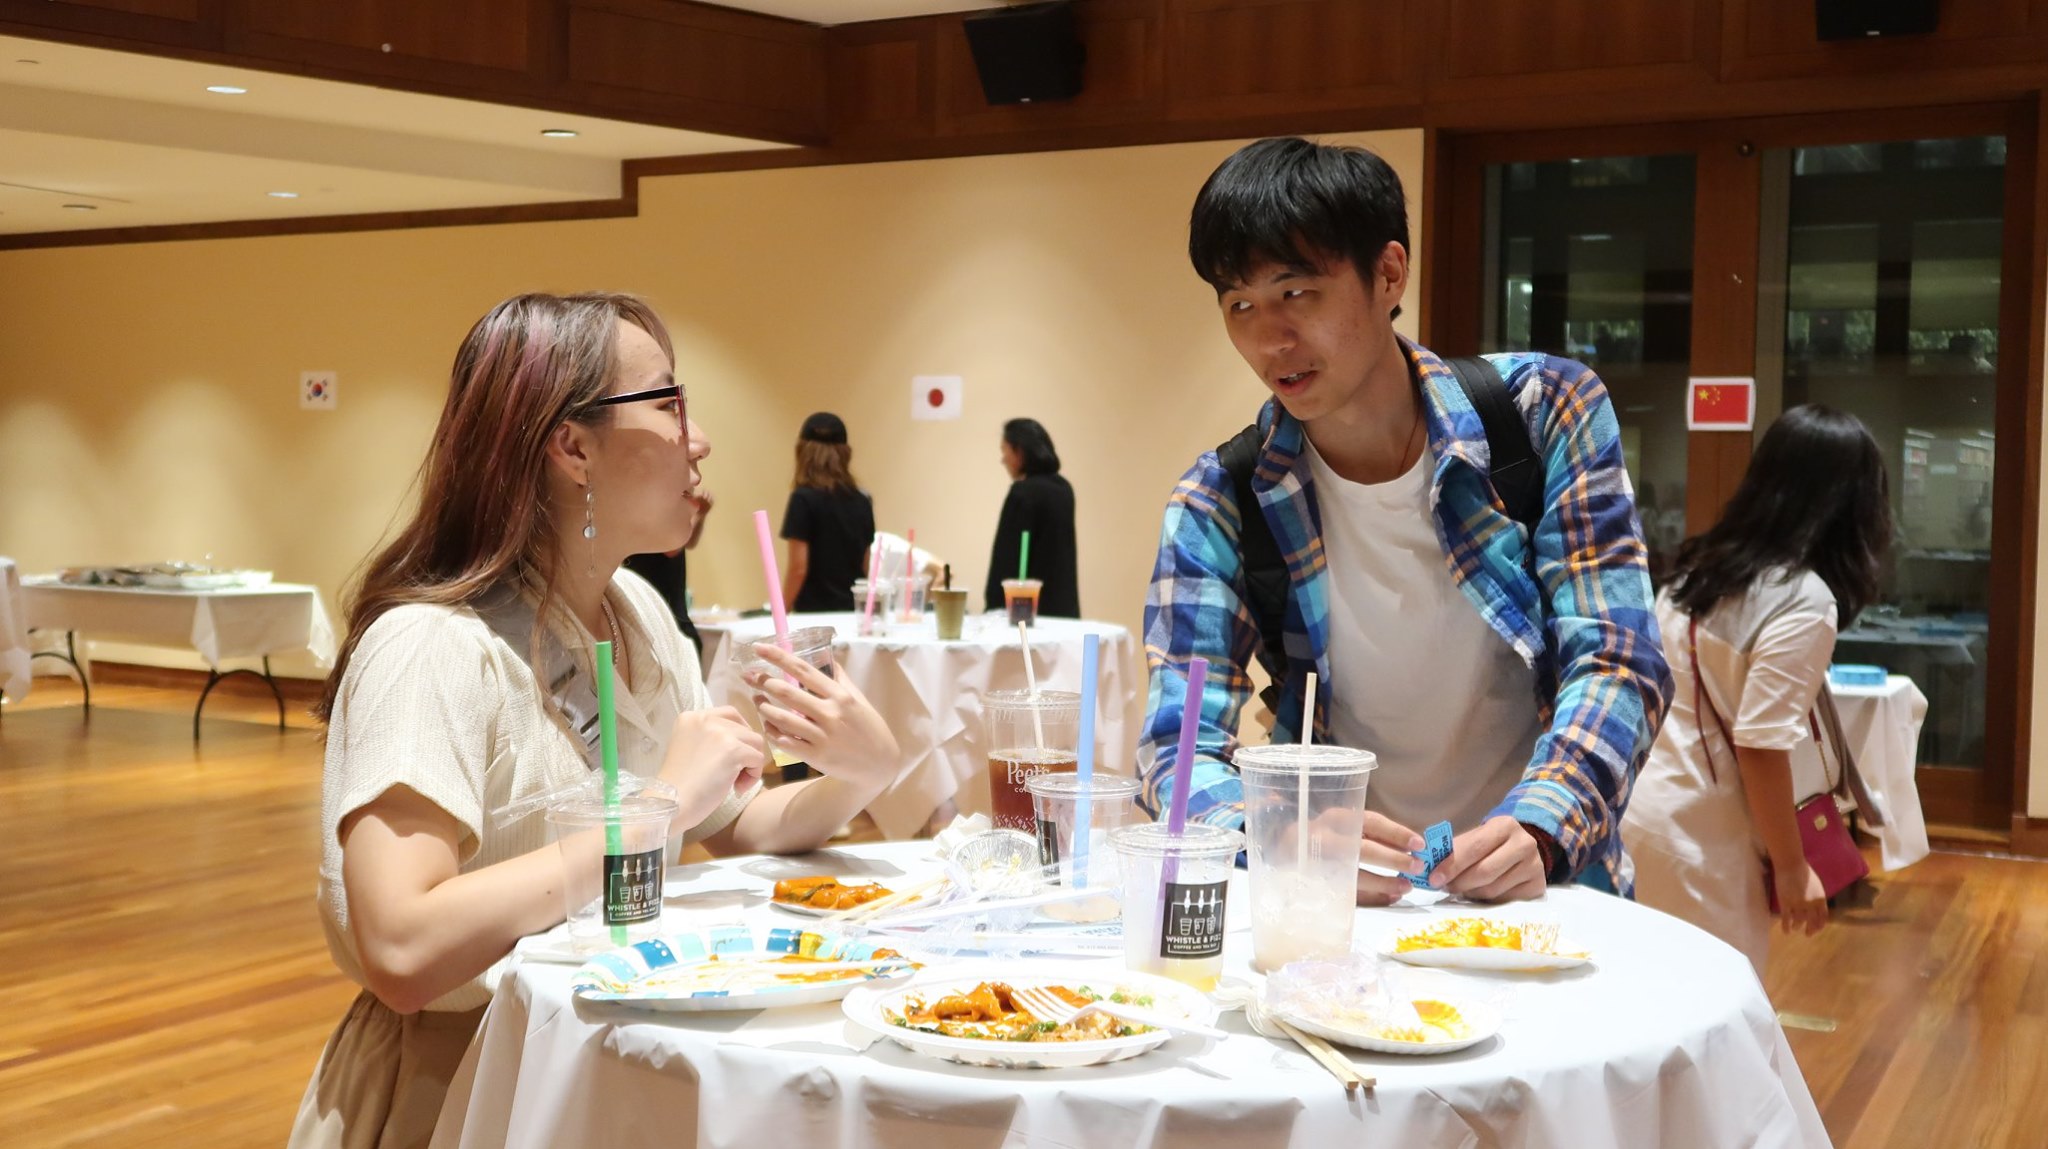 Two students talking at a table during the event.